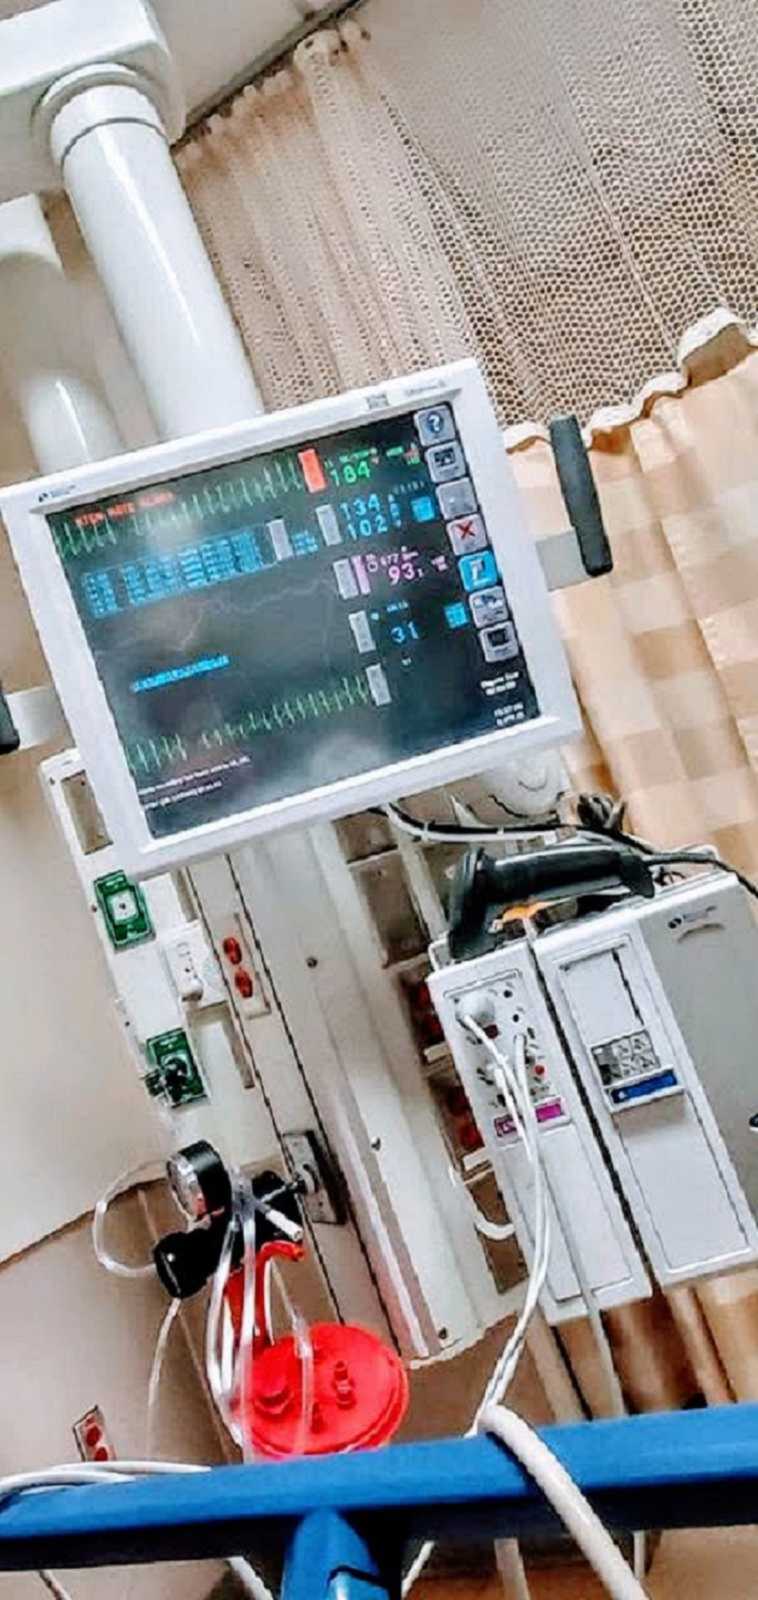 monitor in hospital with vitals on the screen